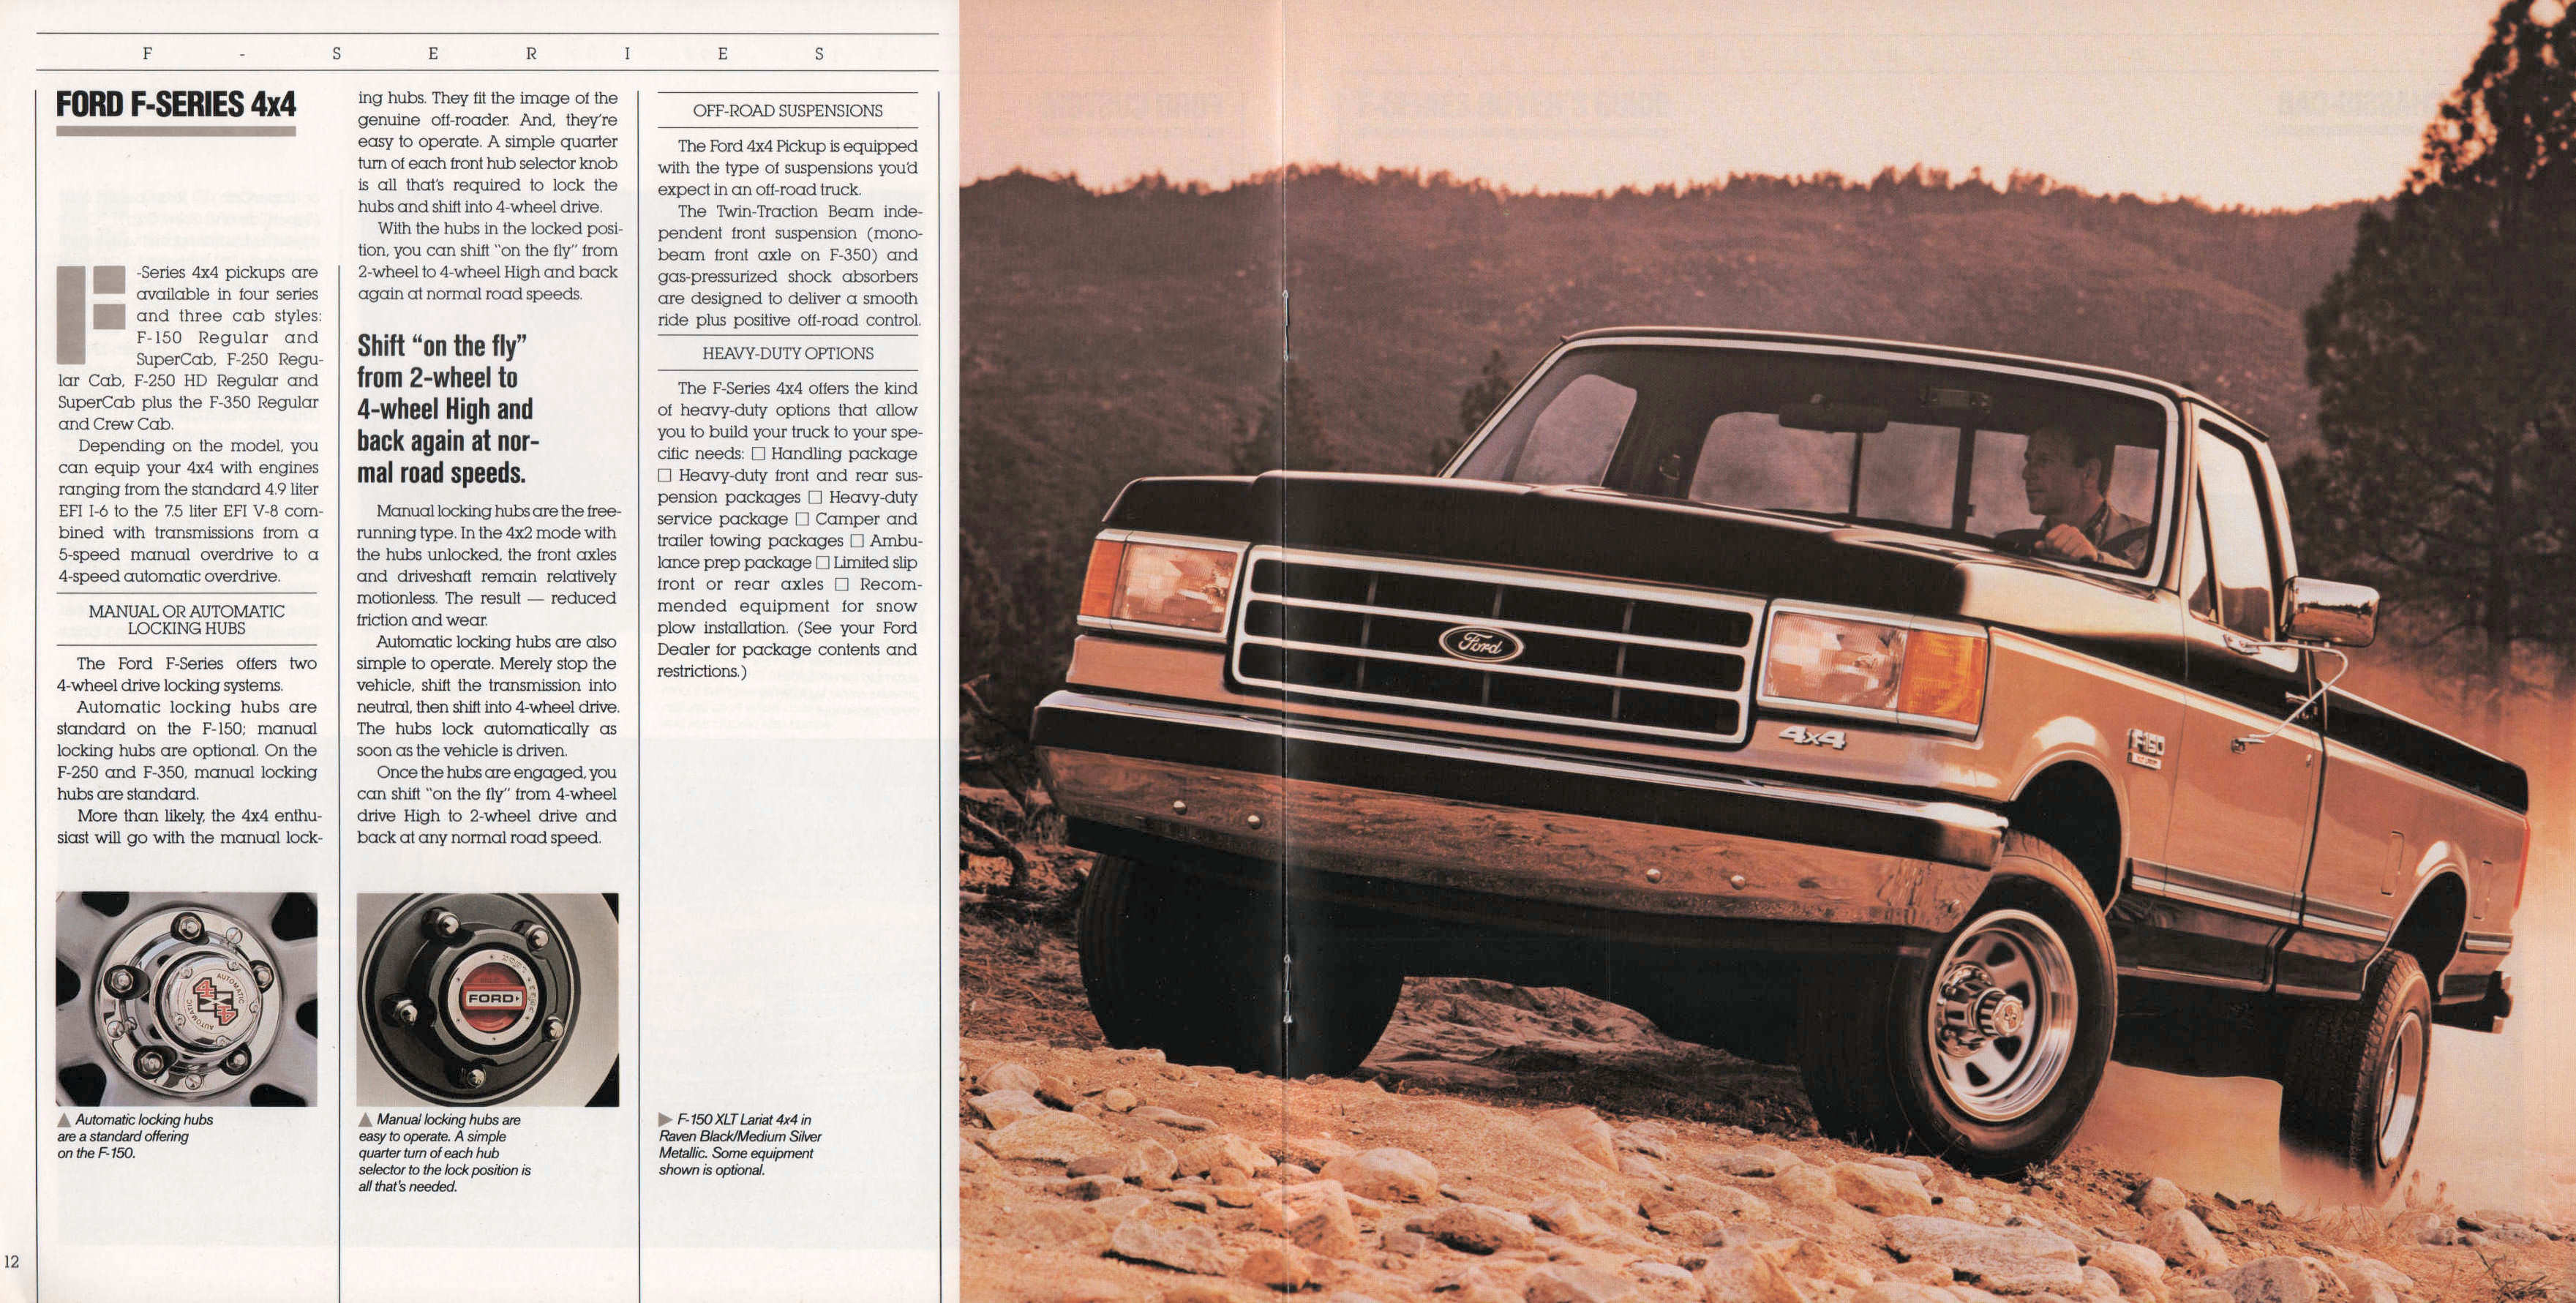 1990_Ford_F_Series-12-13